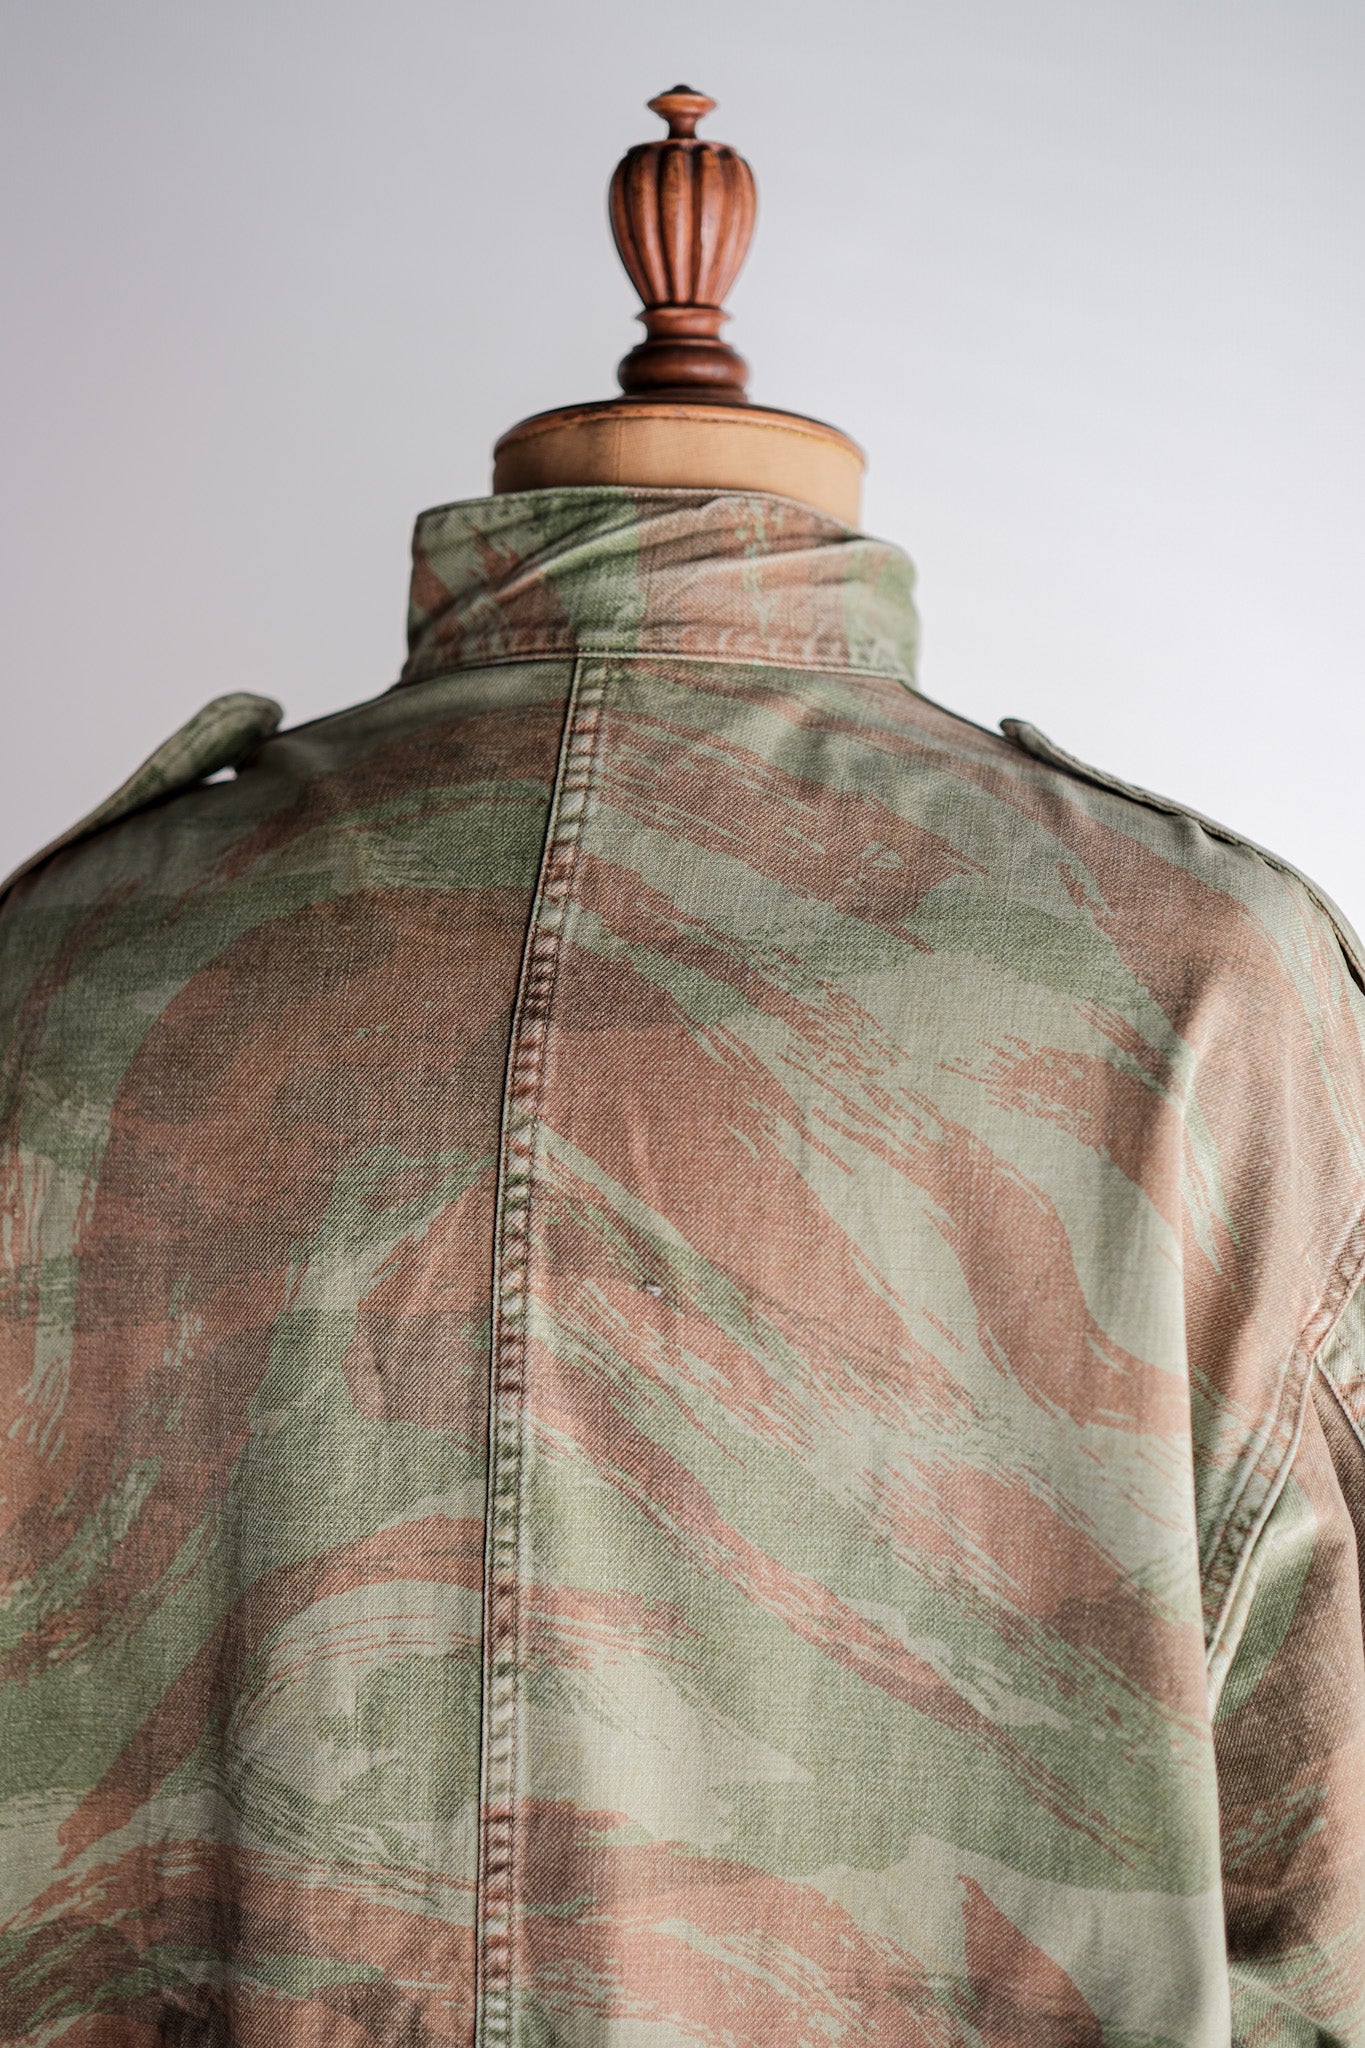 [~ 50's] French Army Tap47/53 Lizard Camouflage Paratrooper Jacket size.46